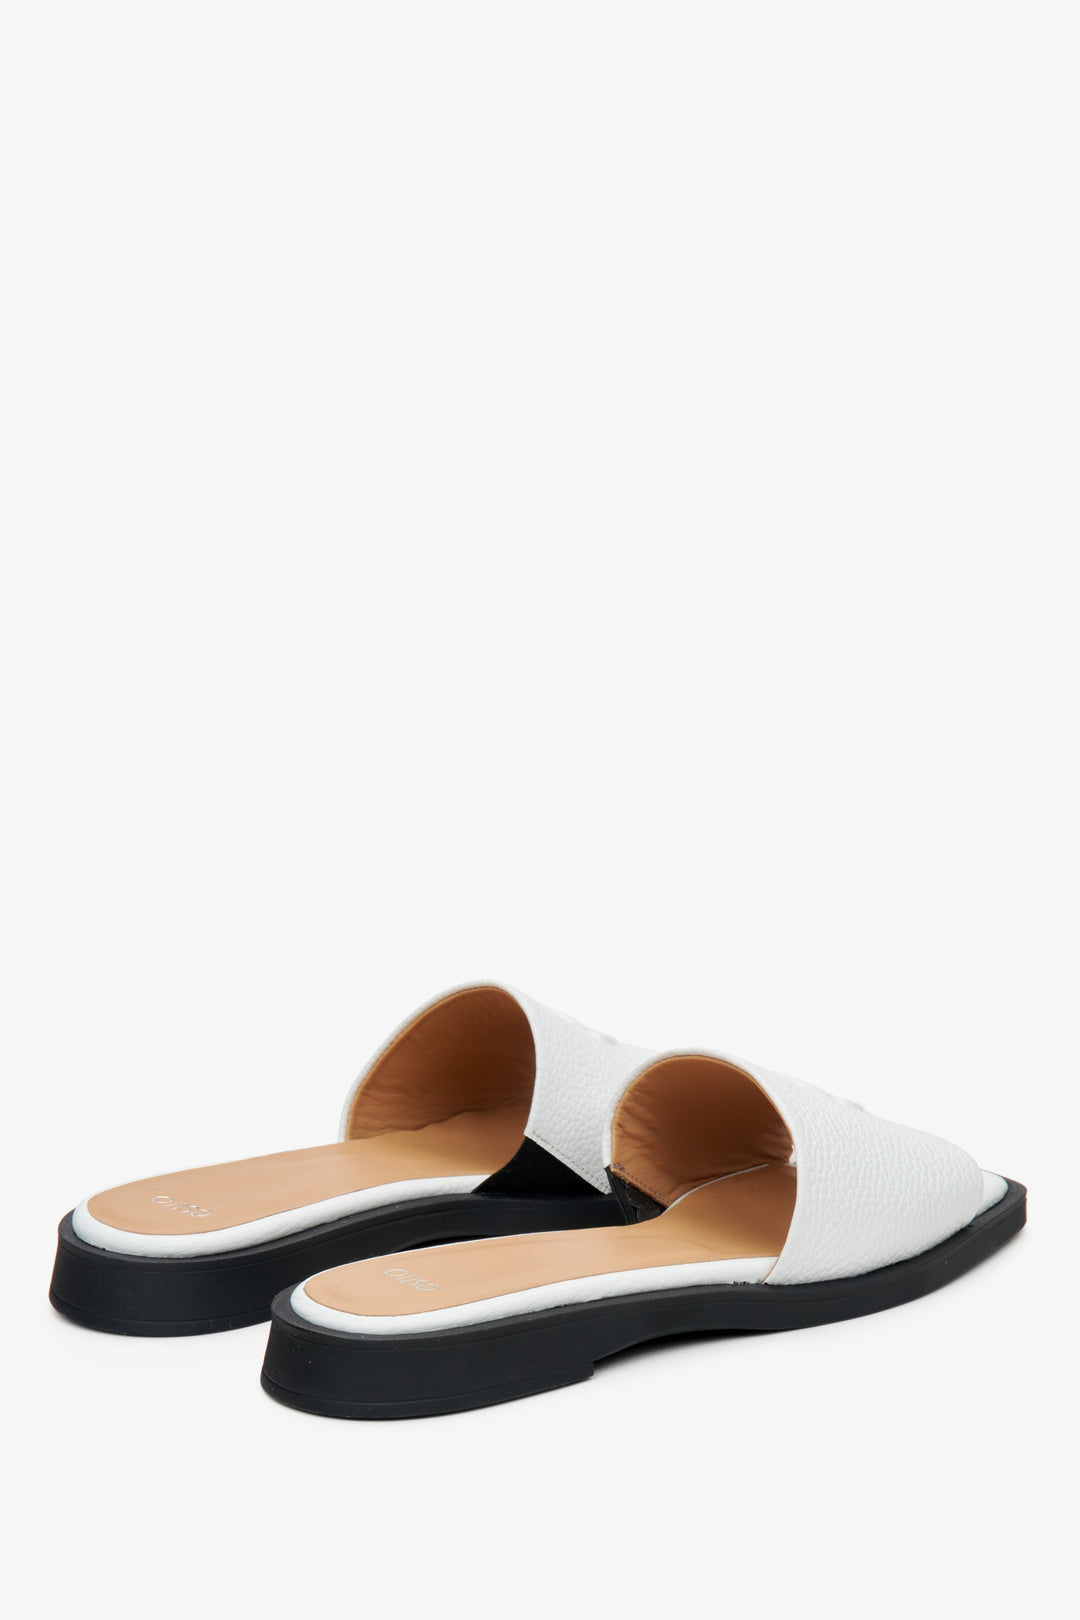 Women's white flip-flops made of genuine leather by Estro.